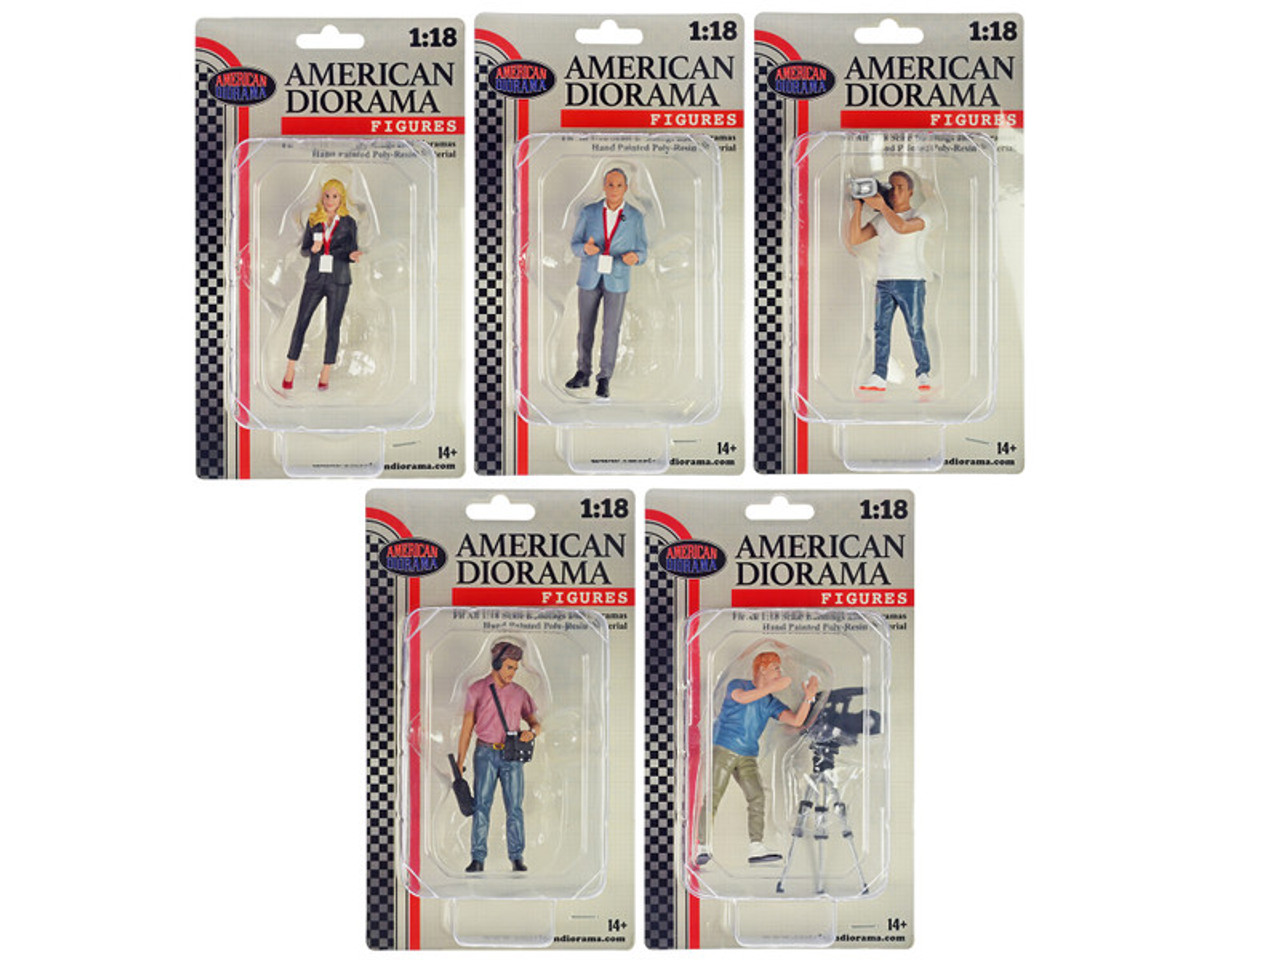 "On-Air" 6 piece Figures and Accessory Set for 1/18 Scale Models by American Diorama